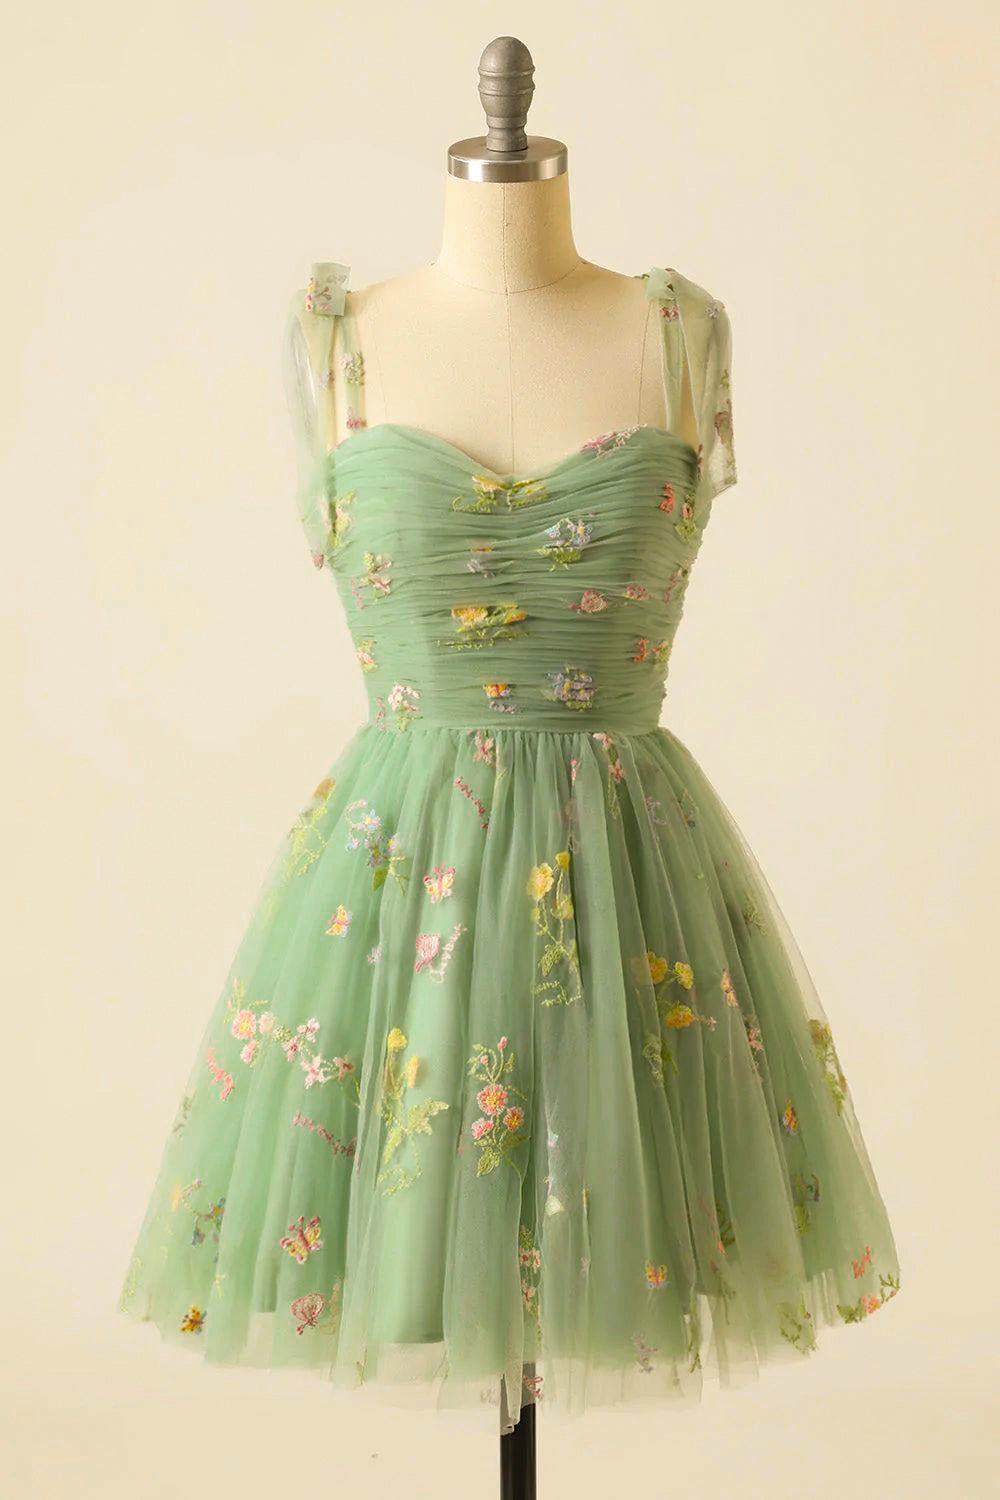 Cute A Line Green Spaghetti Straps Short Homecoming Dress with Embroidery